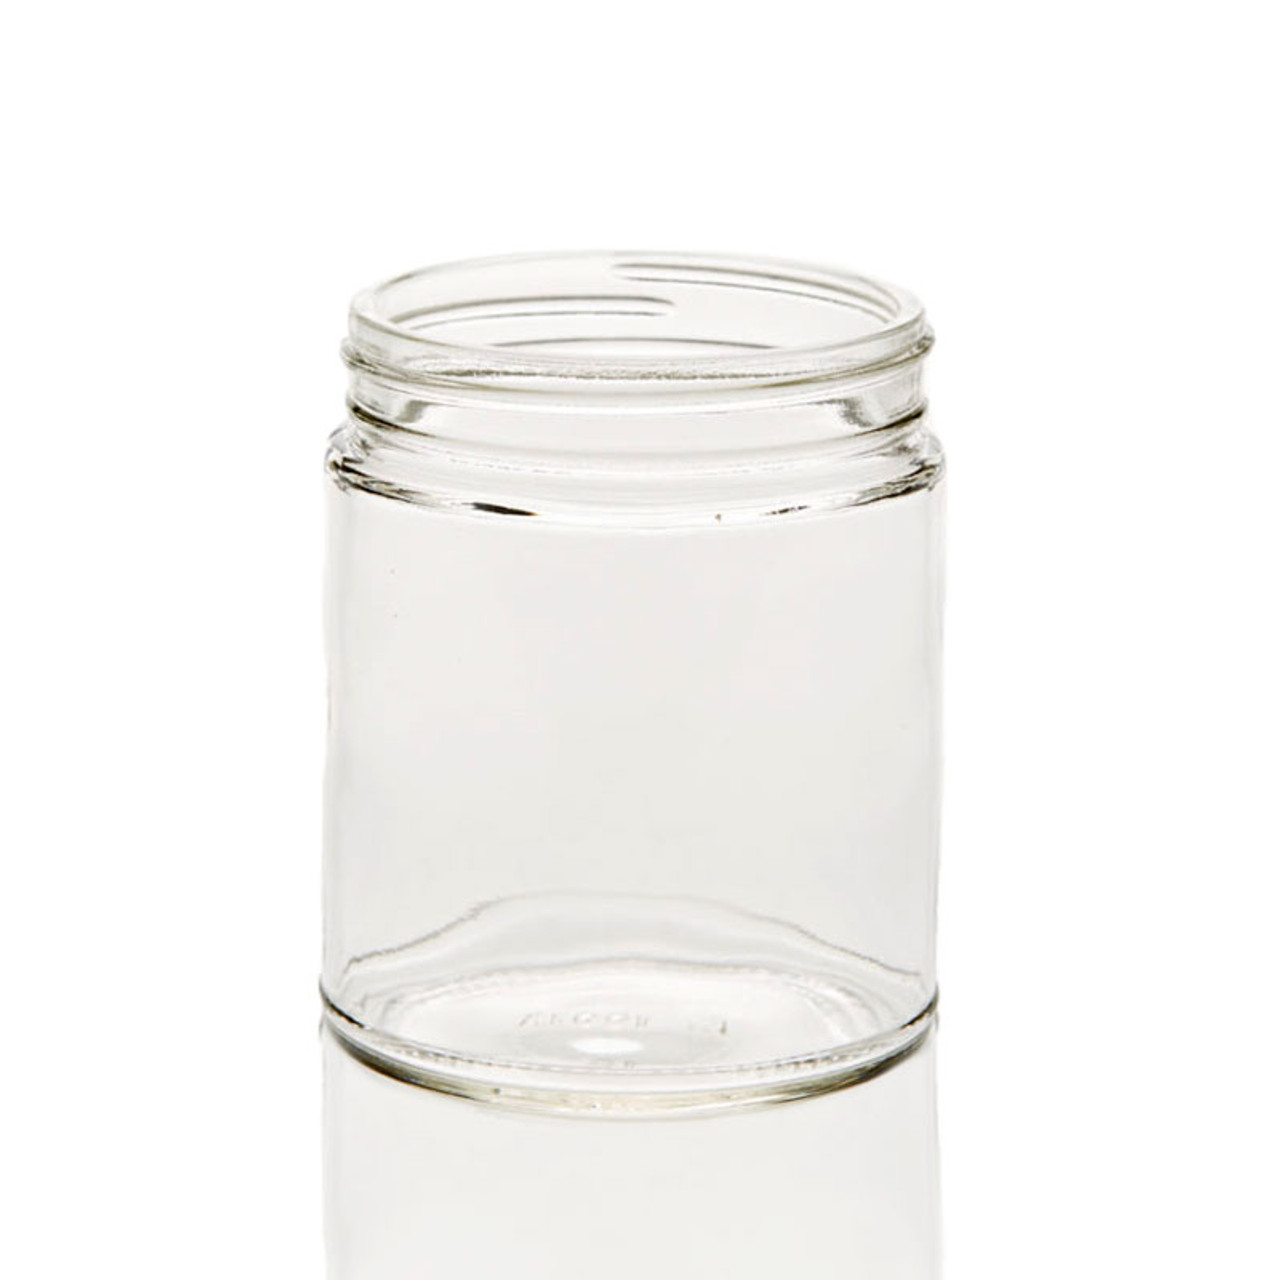 Small medium large size glass juice preserving bottle with clip